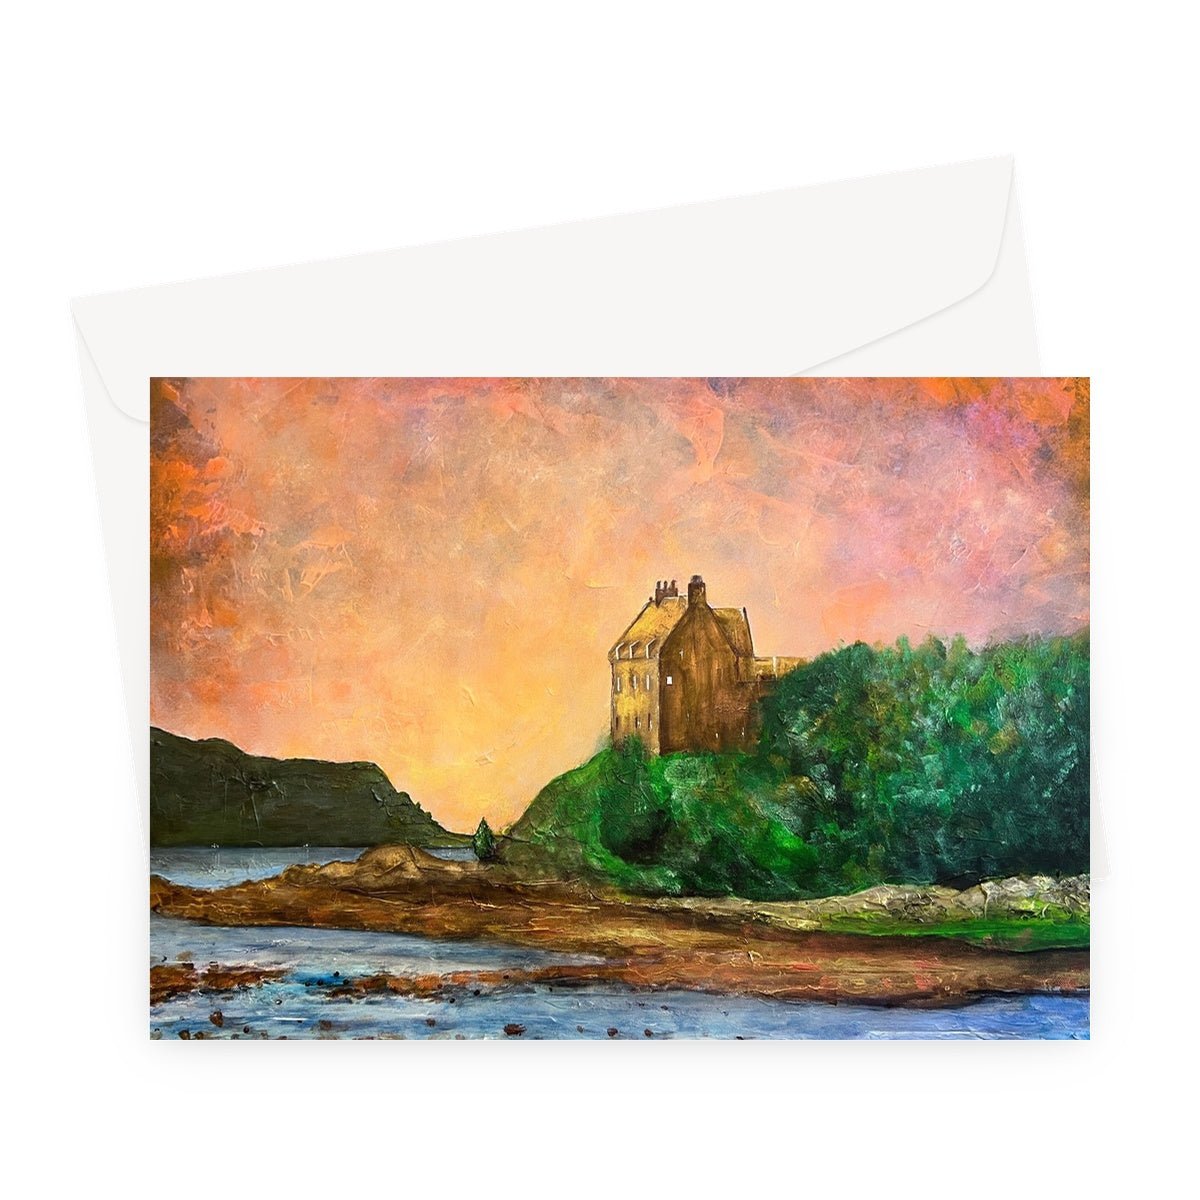 Duntrune Castle Art Gifts Greeting Card-Greetings Cards-Scottish Castles Art Gallery-A5 Landscape-10 Cards-Paintings, Prints, Homeware, Art Gifts From Scotland By Scottish Artist Kevin Hunter